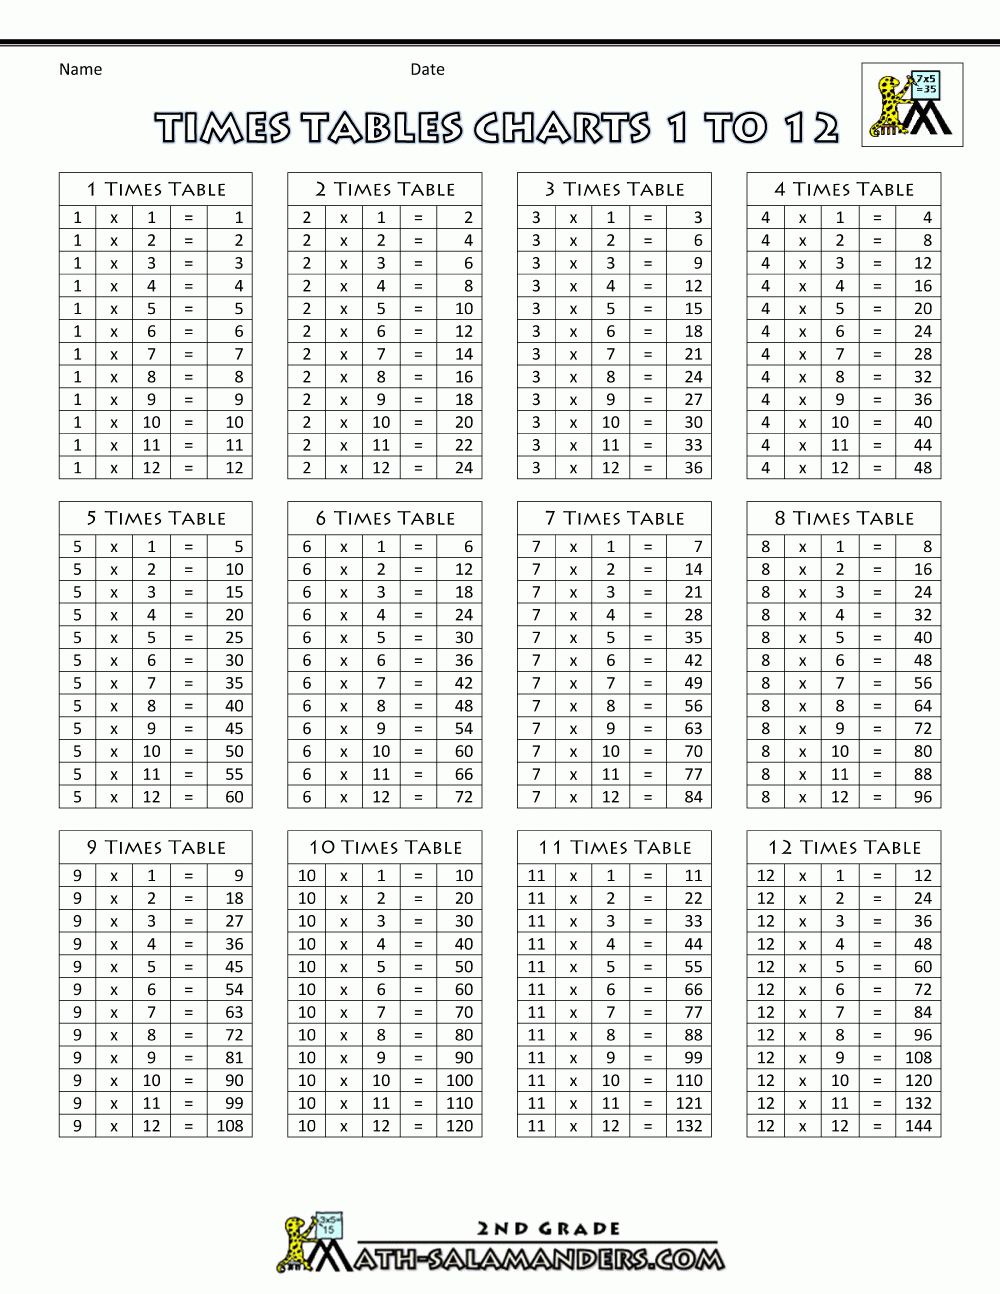 Times Tables Charts Up To 12 Times Table inside Printable Multiplication Table Up To 12